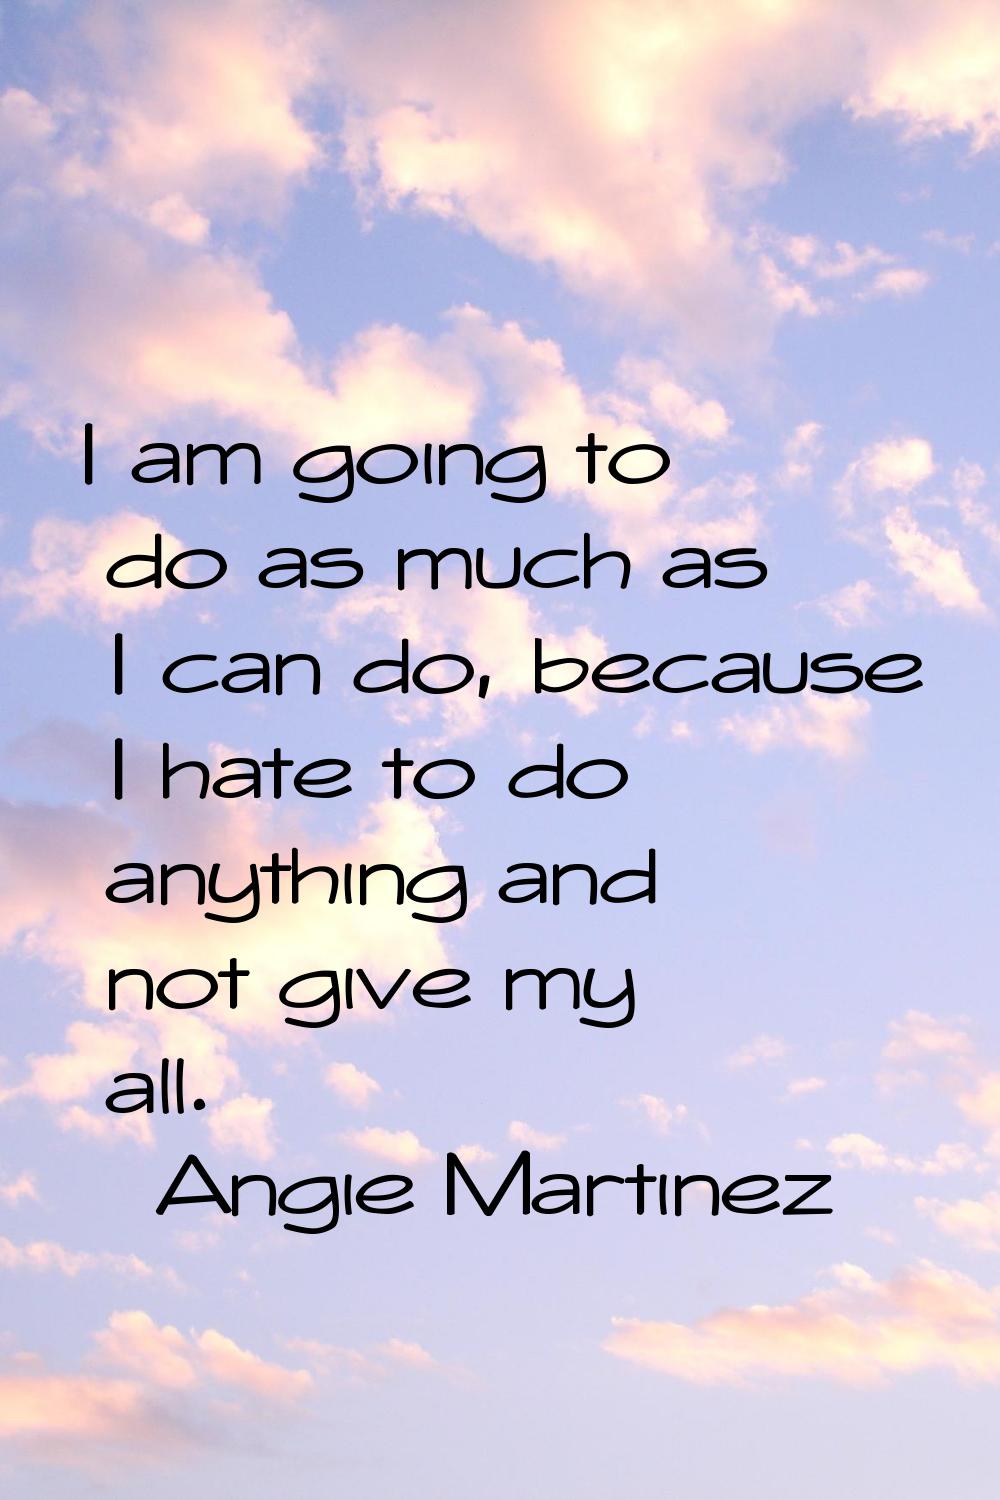 I am going to do as much as I can do, because I hate to do anything and not give my all.